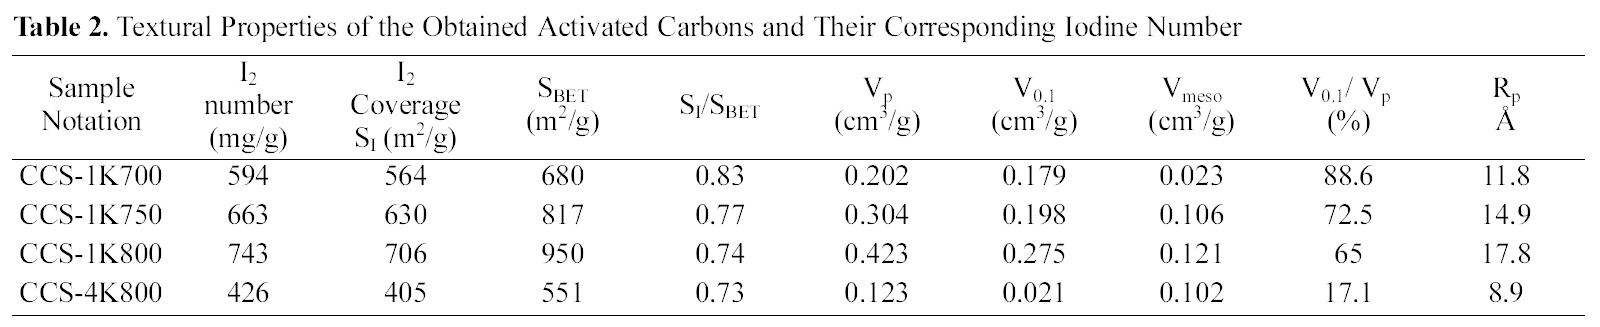 Textural Properties of the Obtained Activated Carbons and Their Corresponding Iodine Number